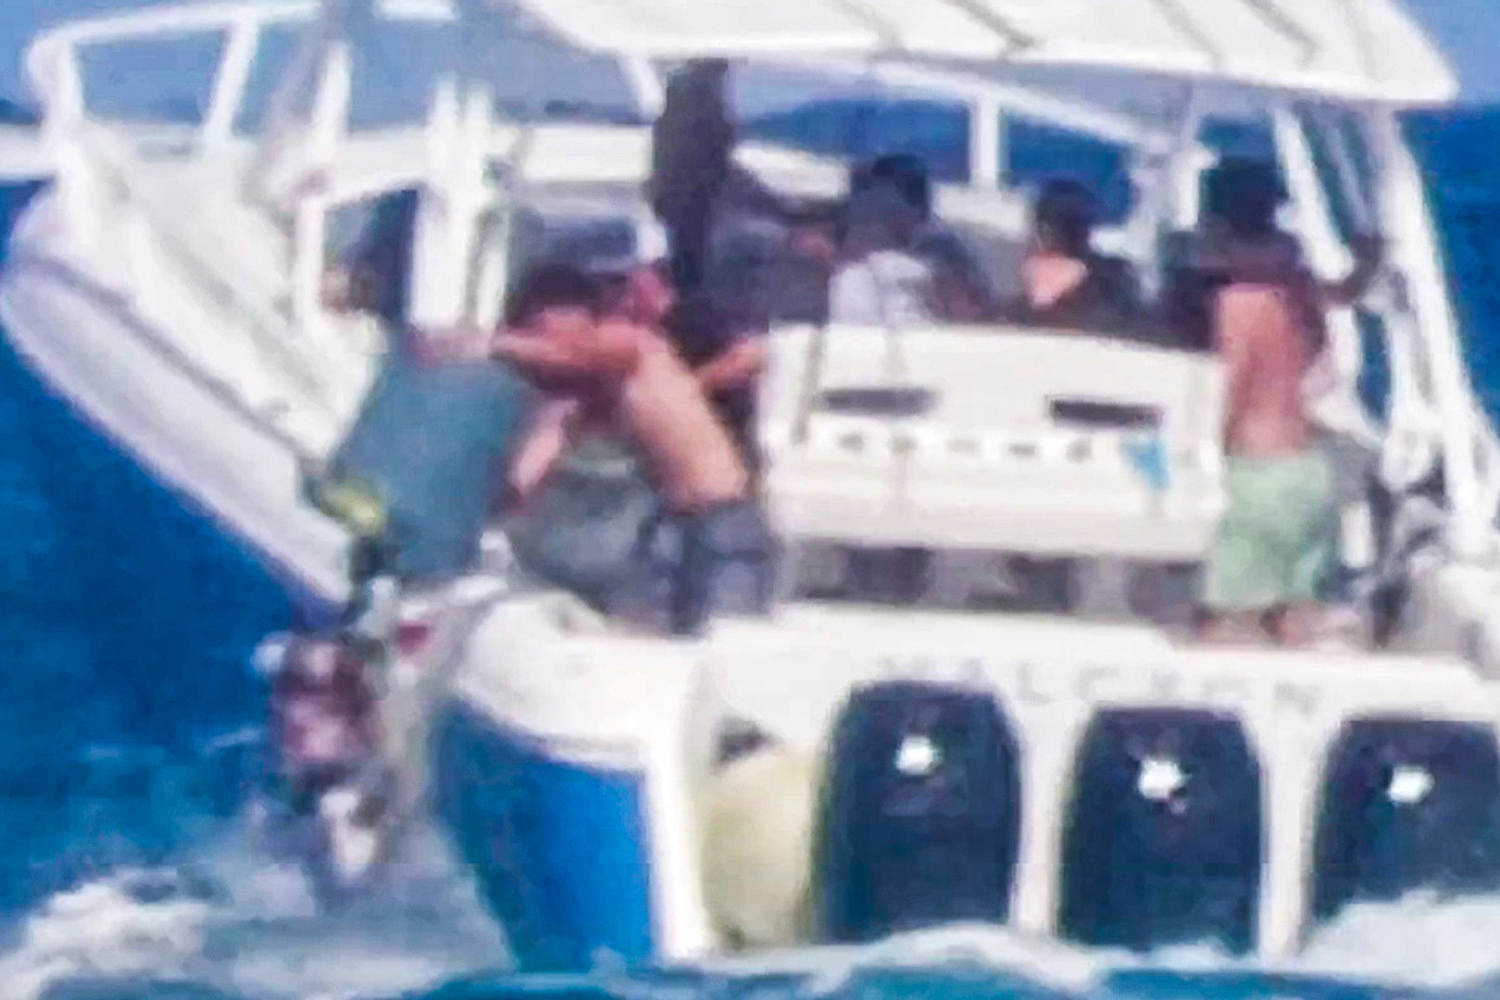 Some Florida boaters seen on video dumping trash into ocean have been identified, officials say